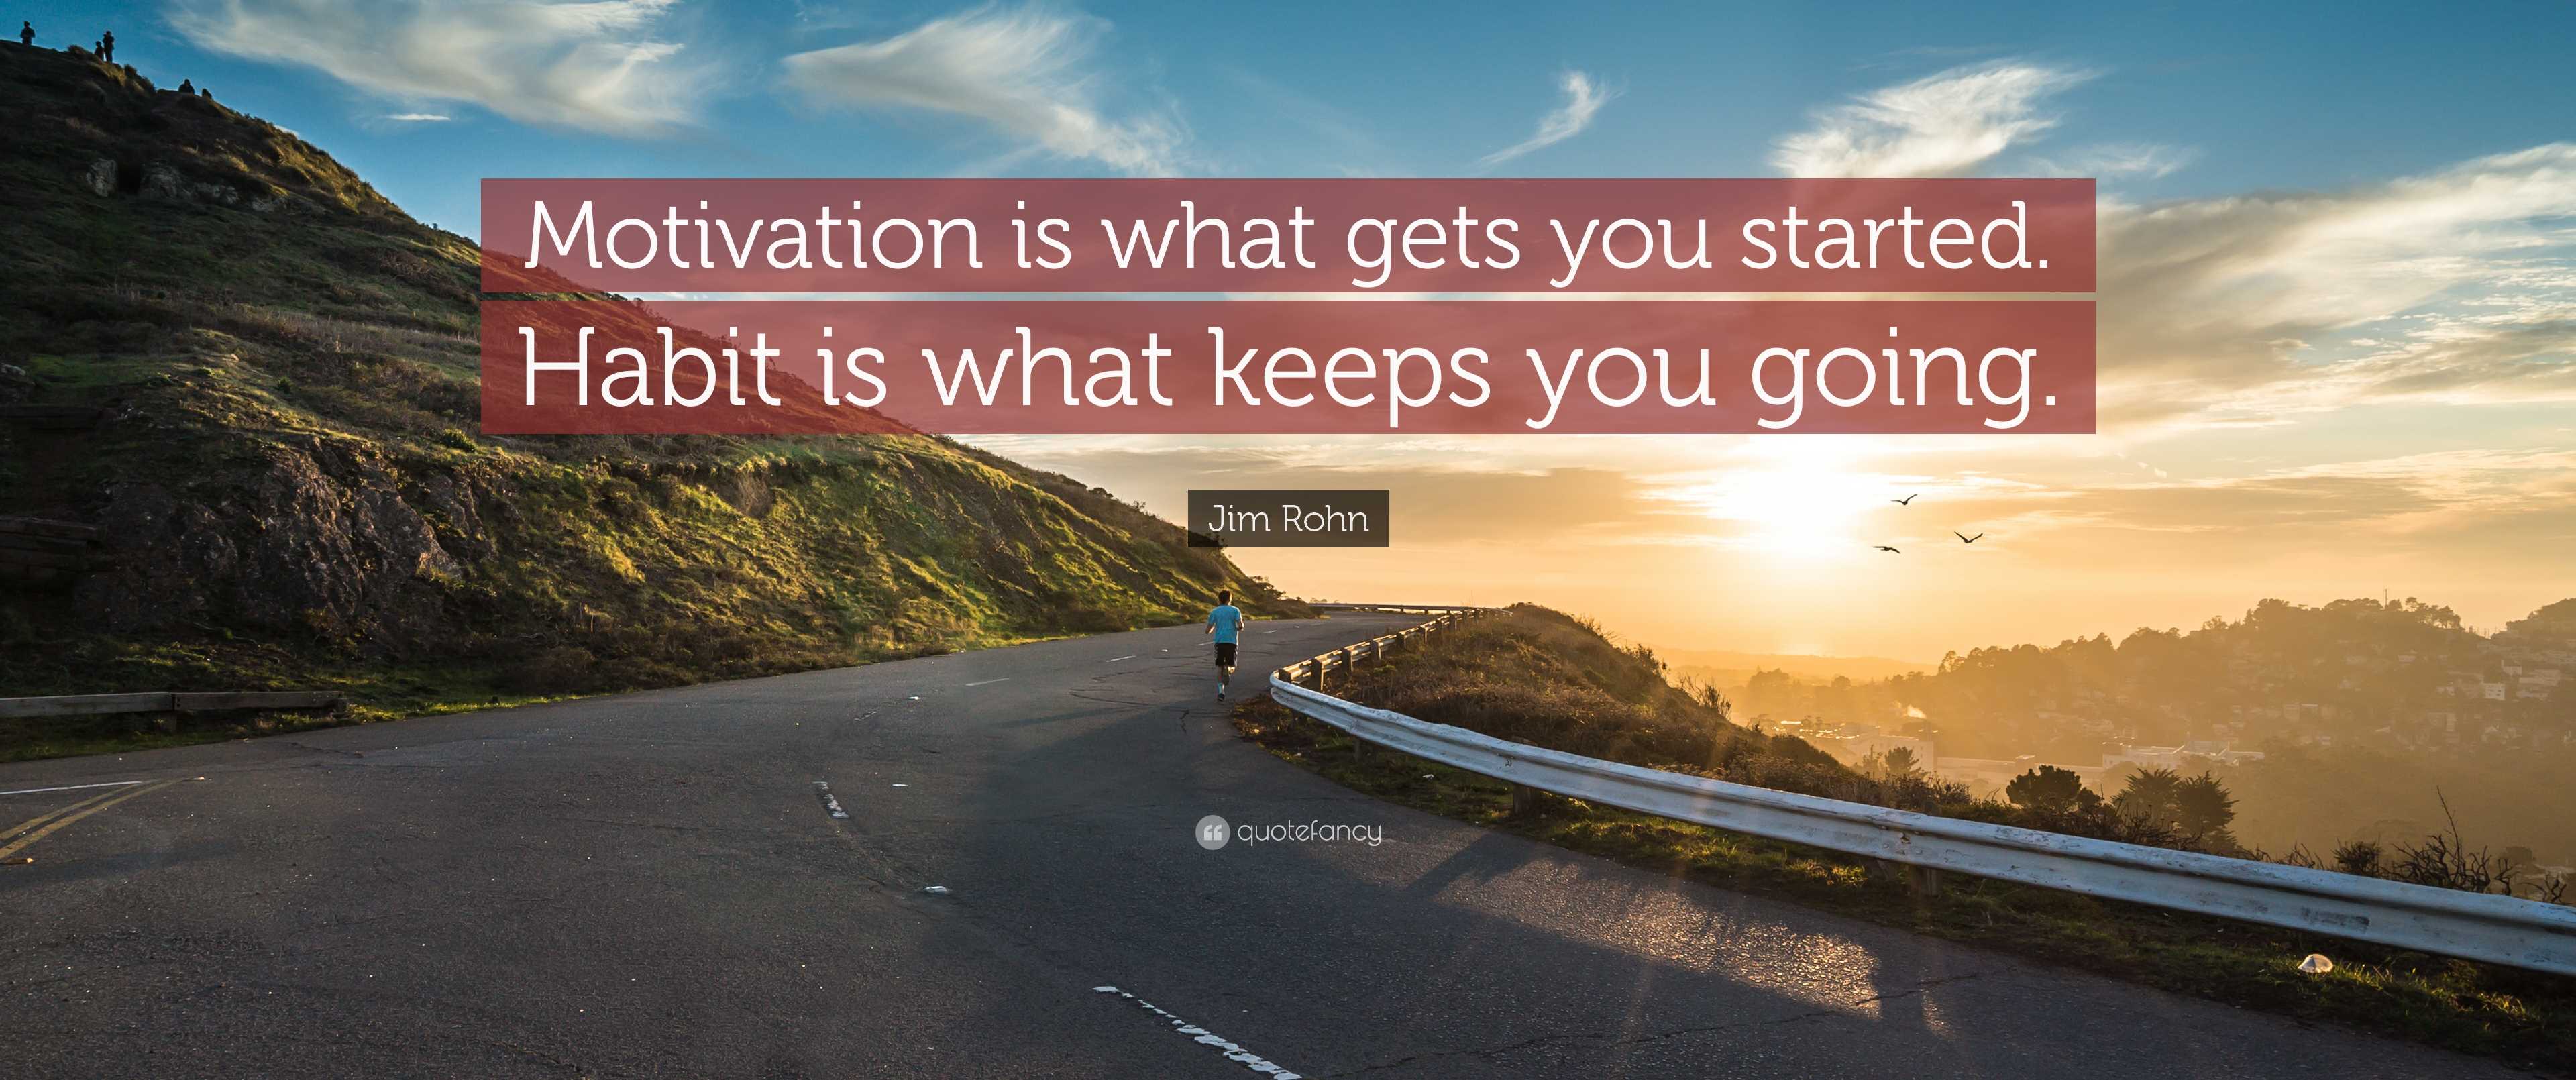 Motivation is what gets you started. Habit is what keeps you going